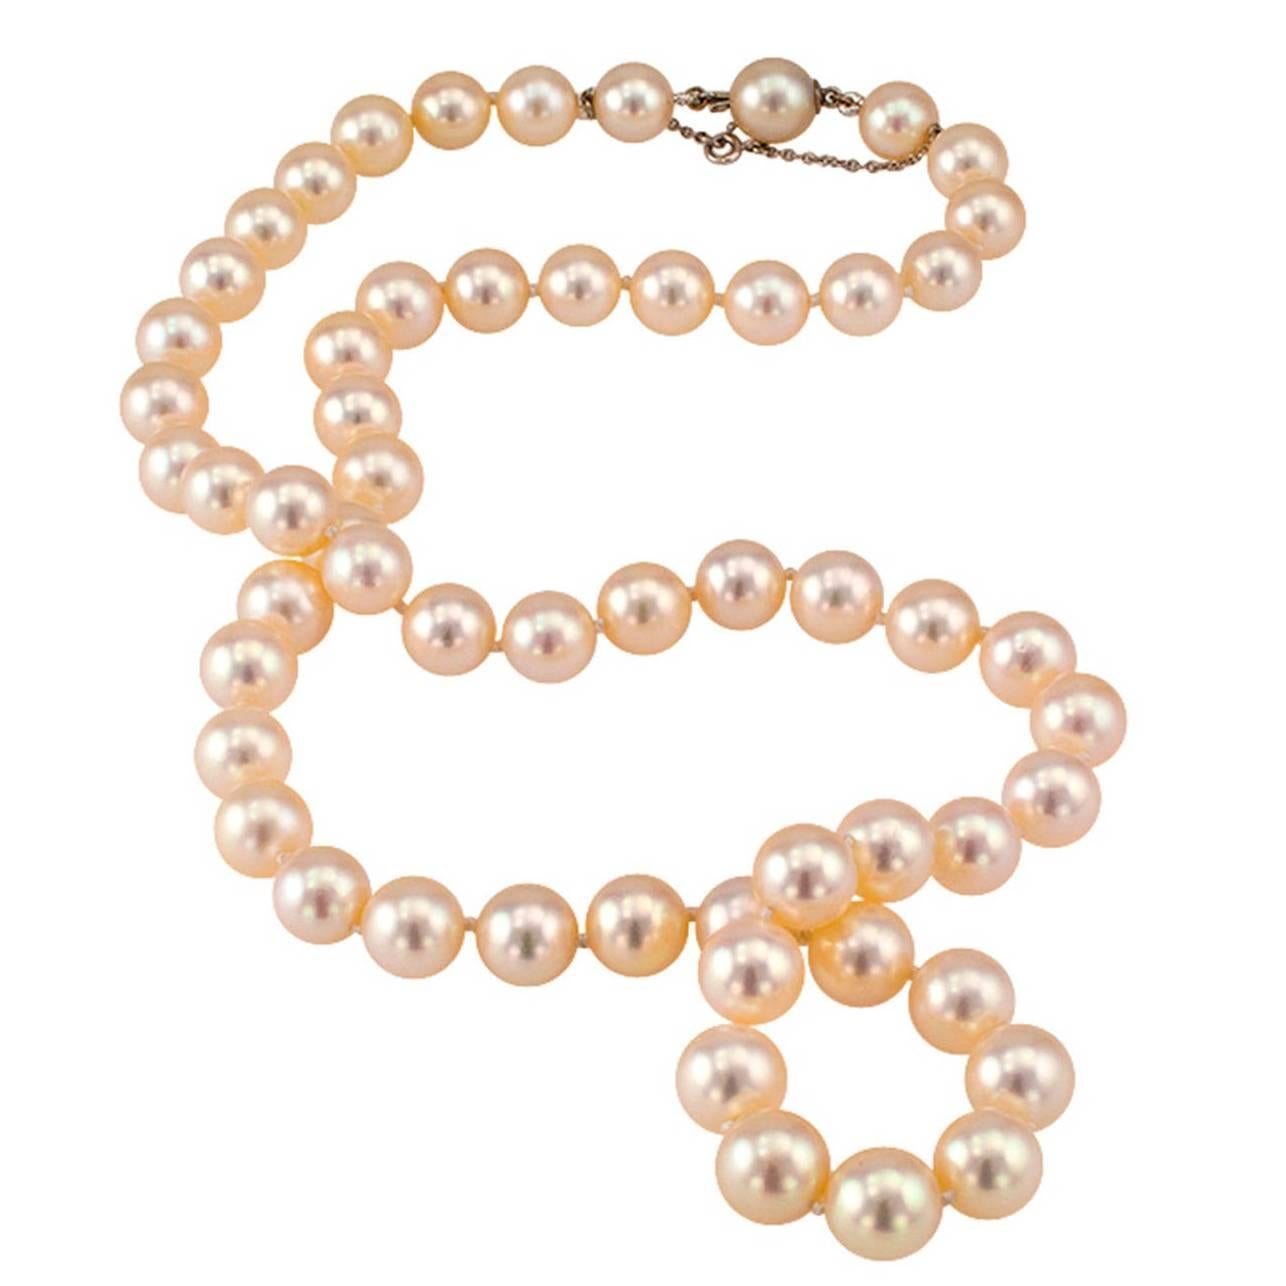 1960s Cultured Pearl Necklace